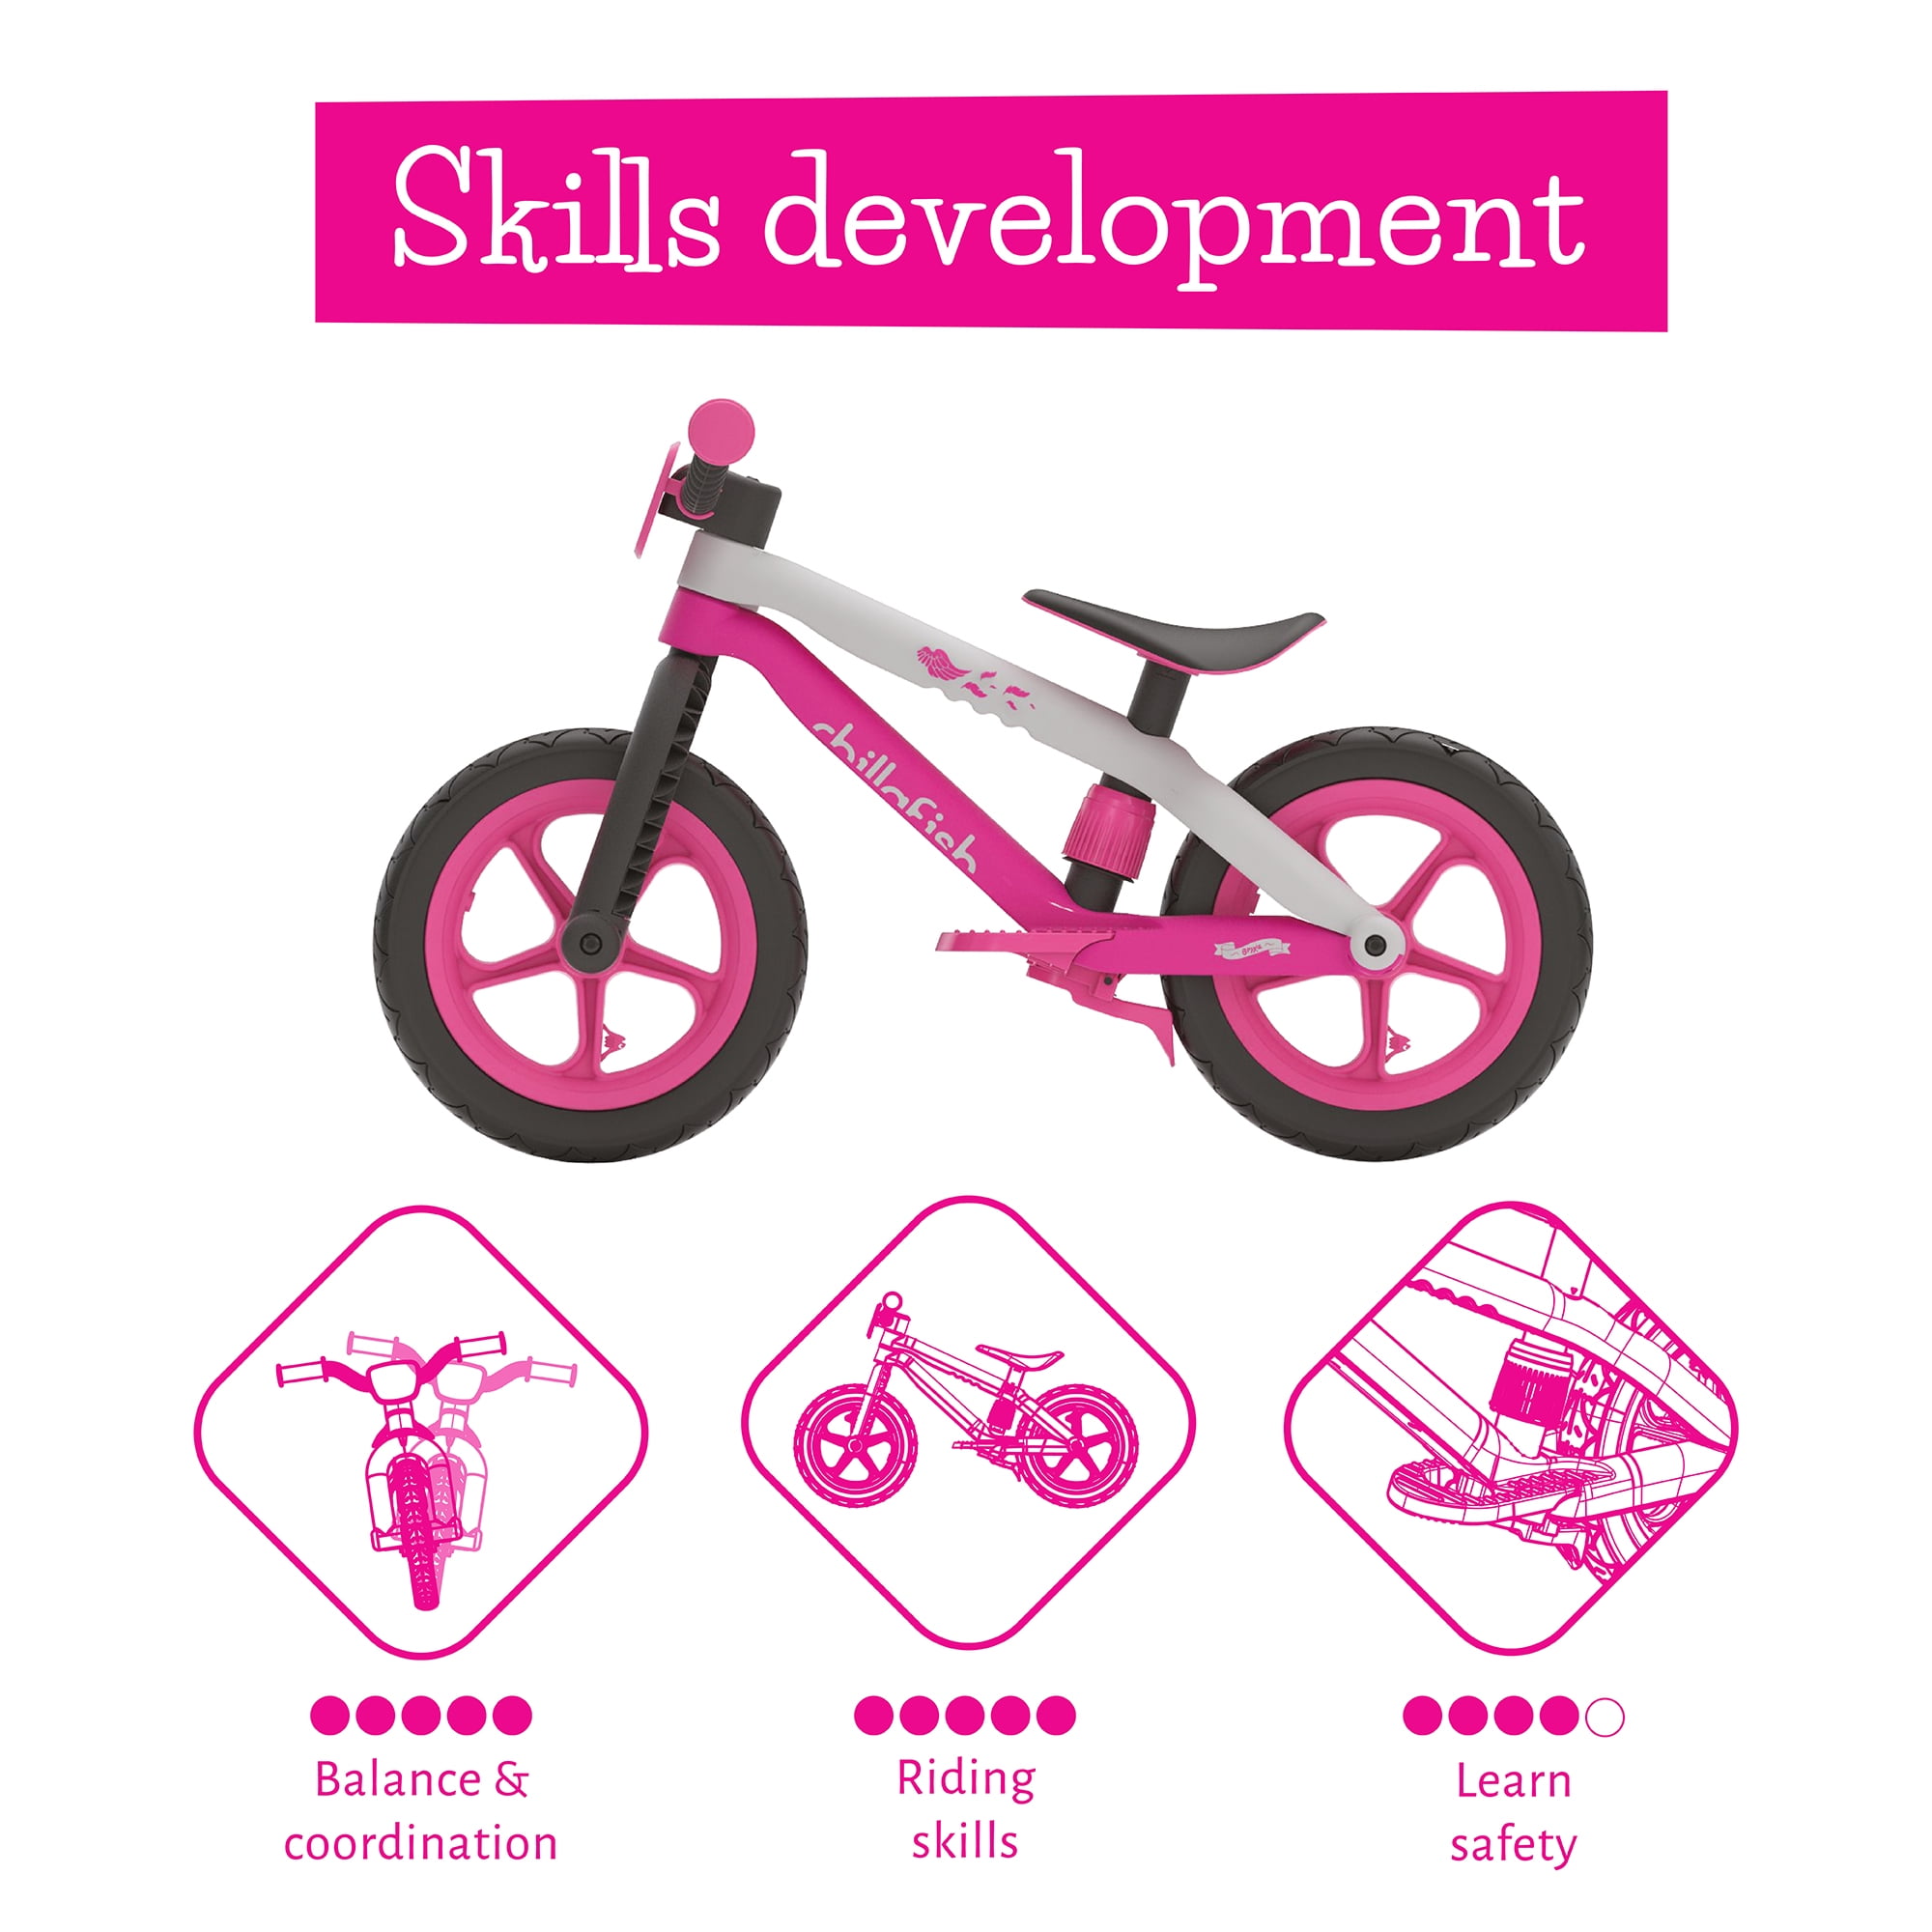 Chillafish Bmxie 2 lightweight balance bike with integrated footrest and footbrake Ginger adjustable seat without tools for kids 2 to 5 years 12 inch airless rubberskin tires 